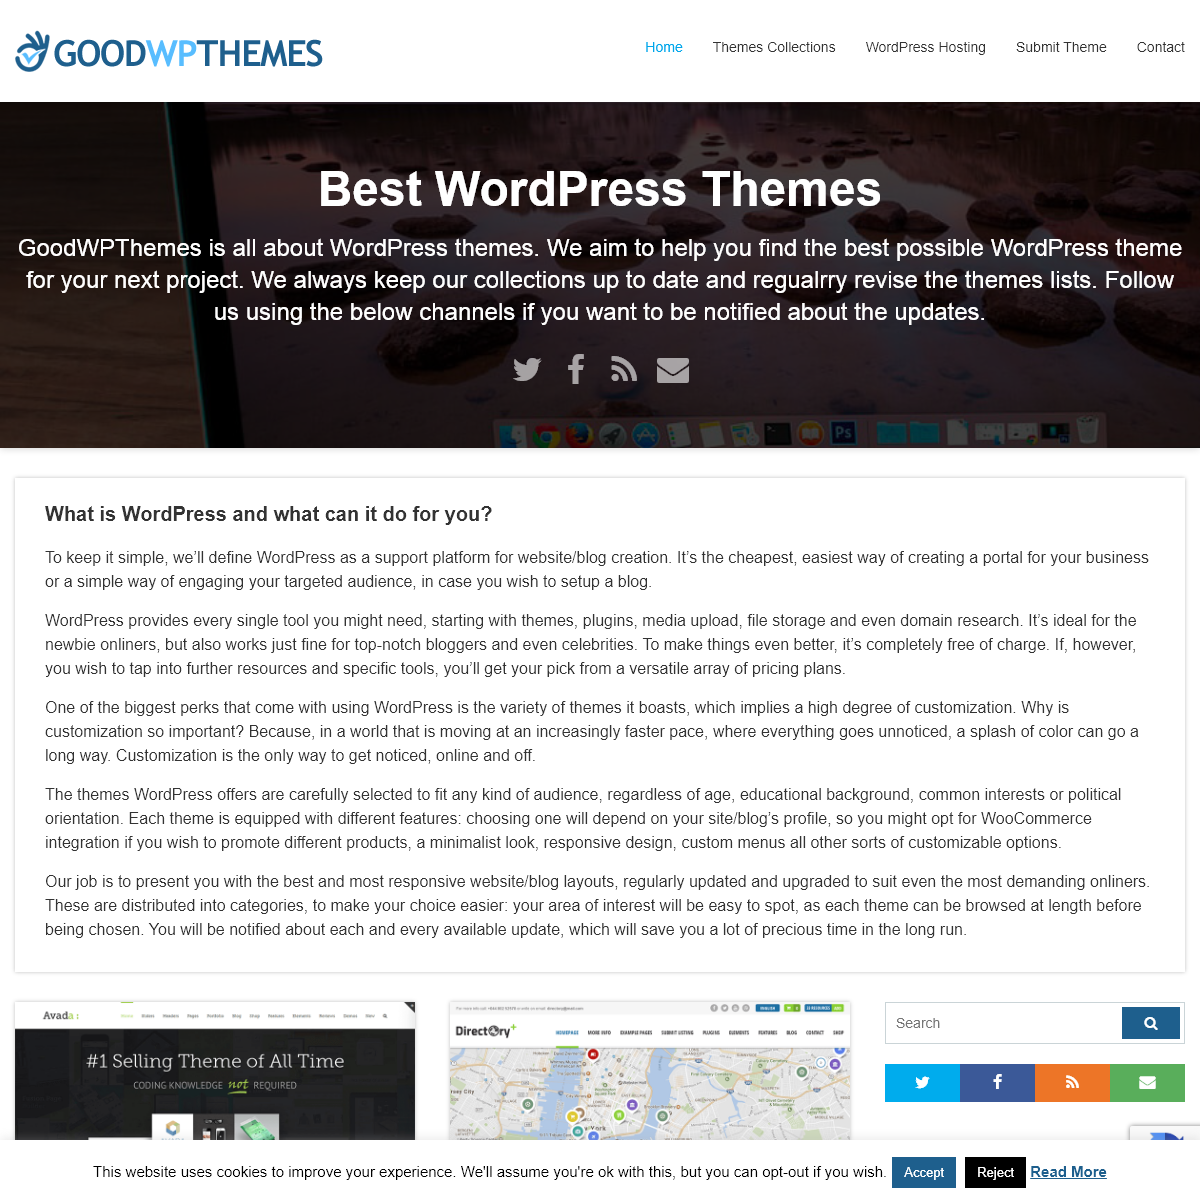 A complete backup of goodwpthemes.com